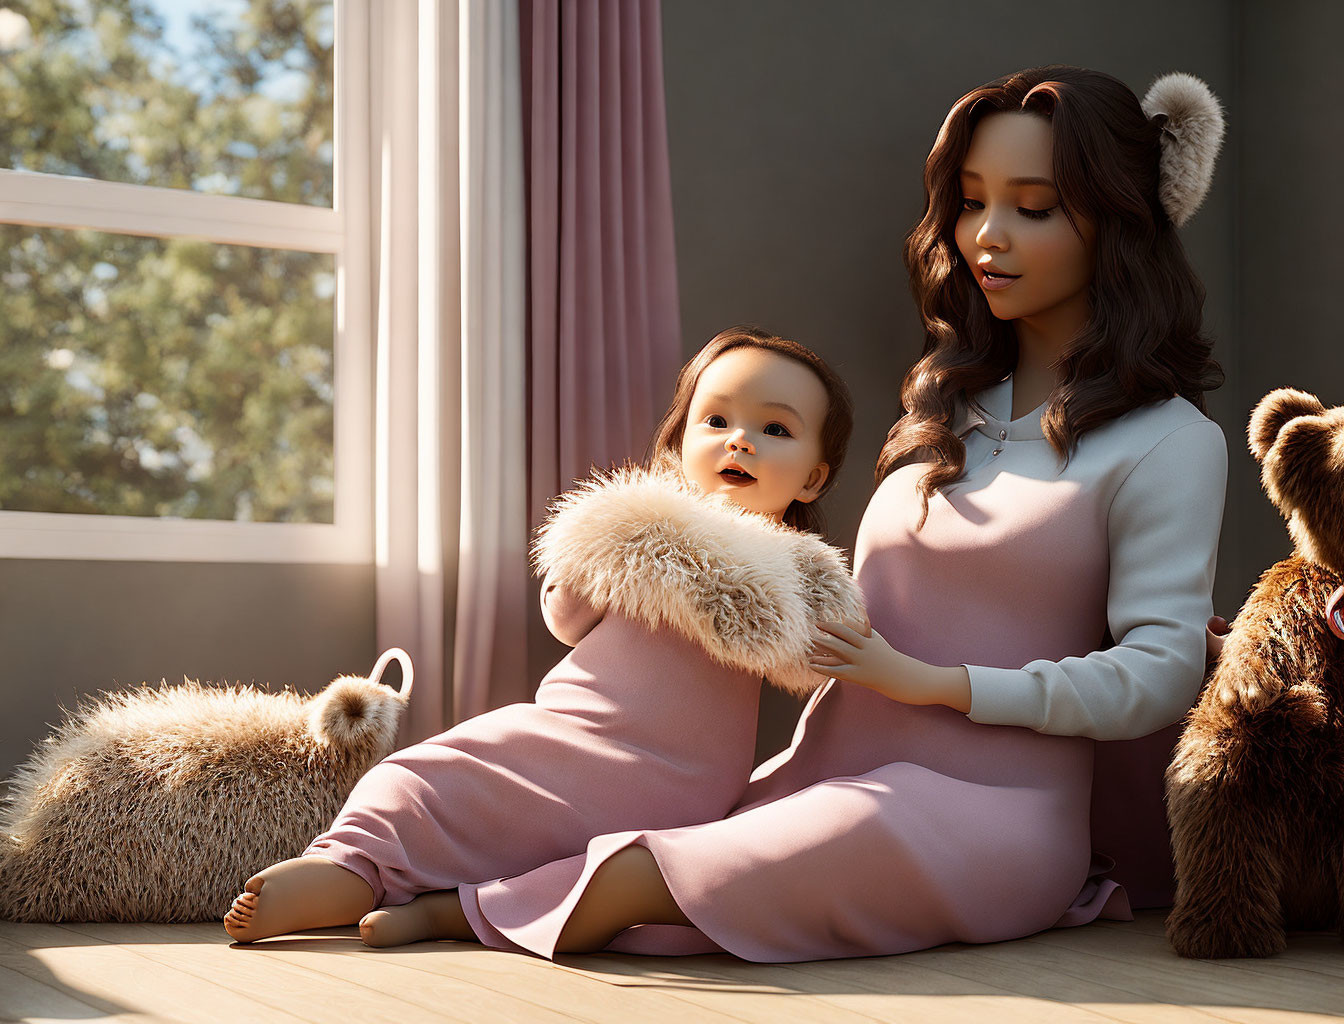 Woman and Child in Matching Pink Dresses by Window with Plush Toys